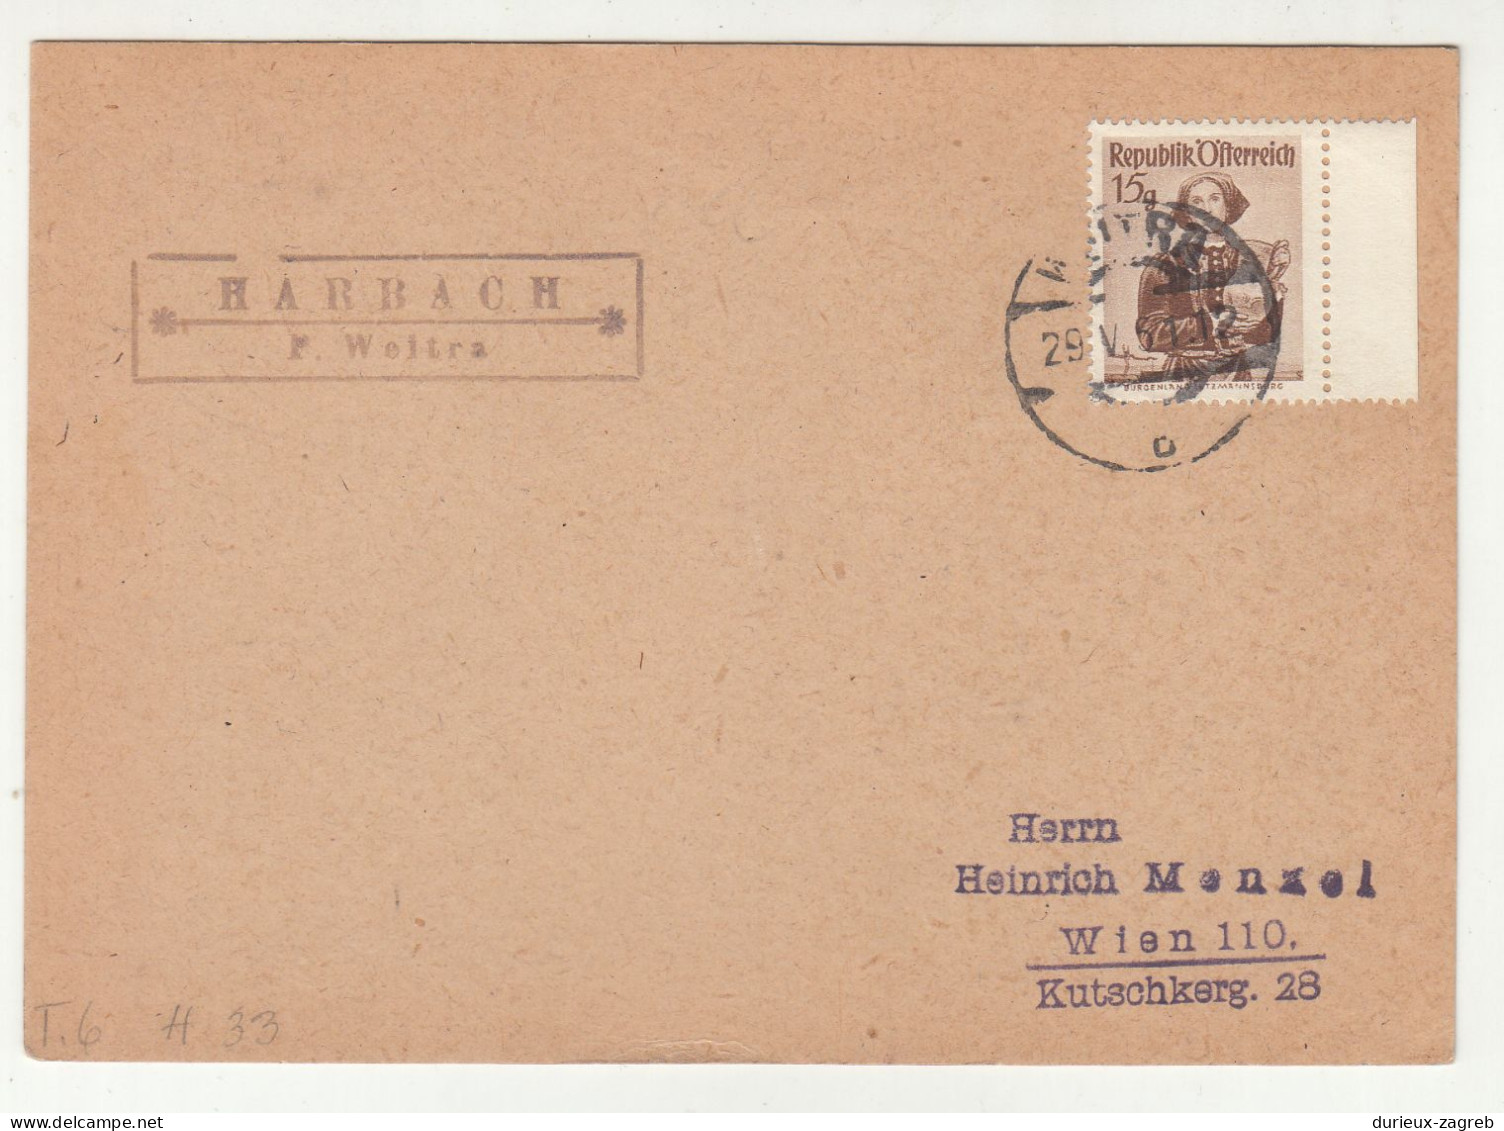 Harbach P. Weitra Mark On Card Posted? 1961 B240401 - Storia Postale